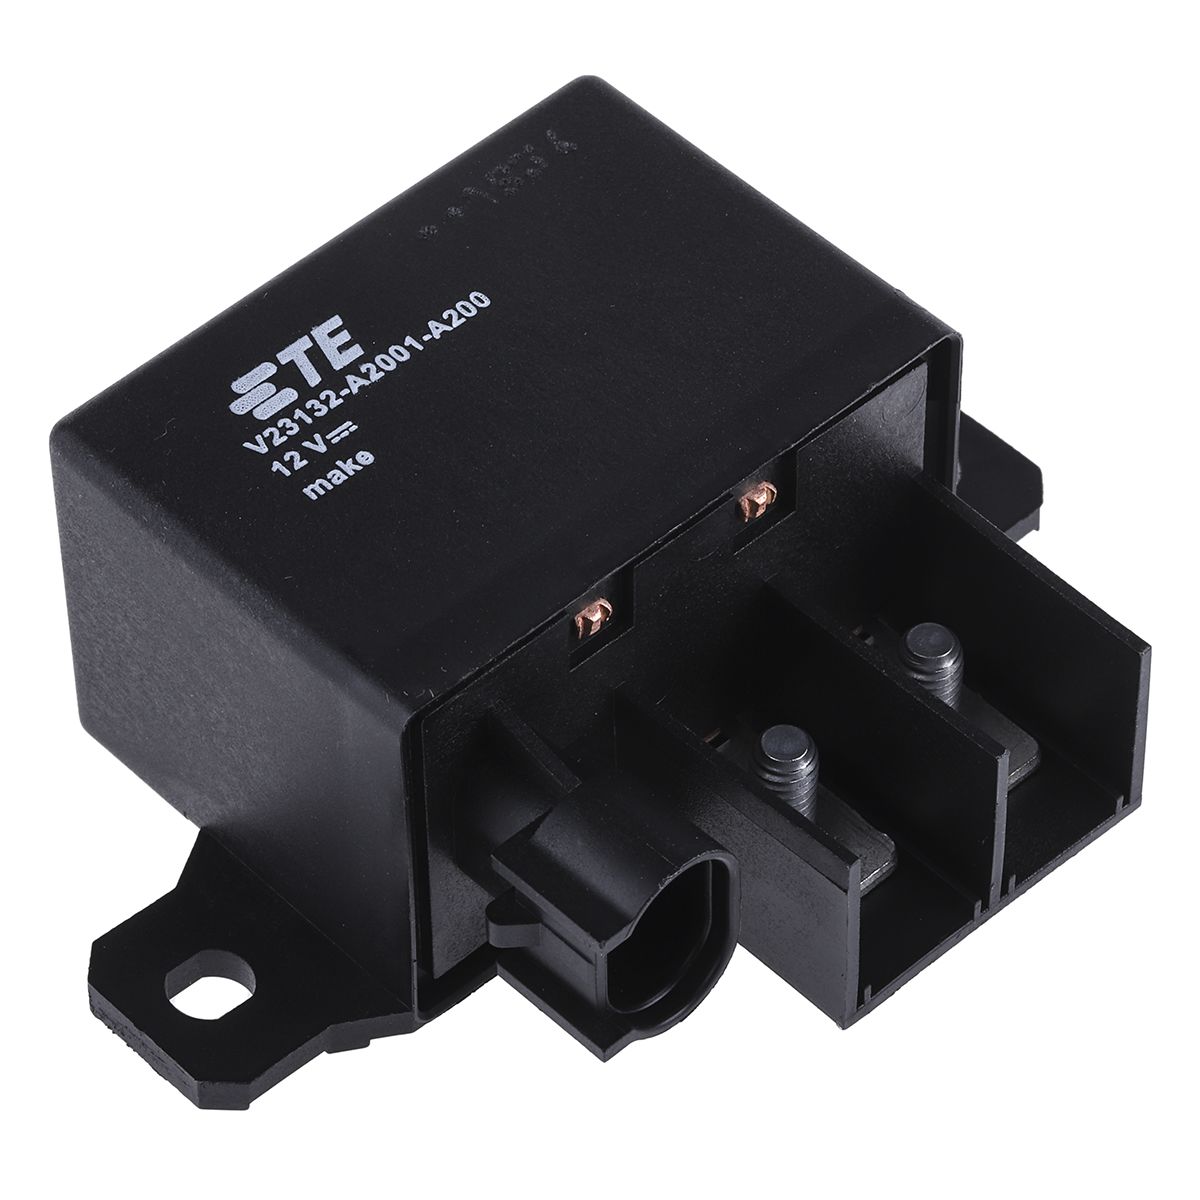 TE Connectivity Flange Mount Automotive Relay, 12V dc Coil, 300A Switching Current, SPNO